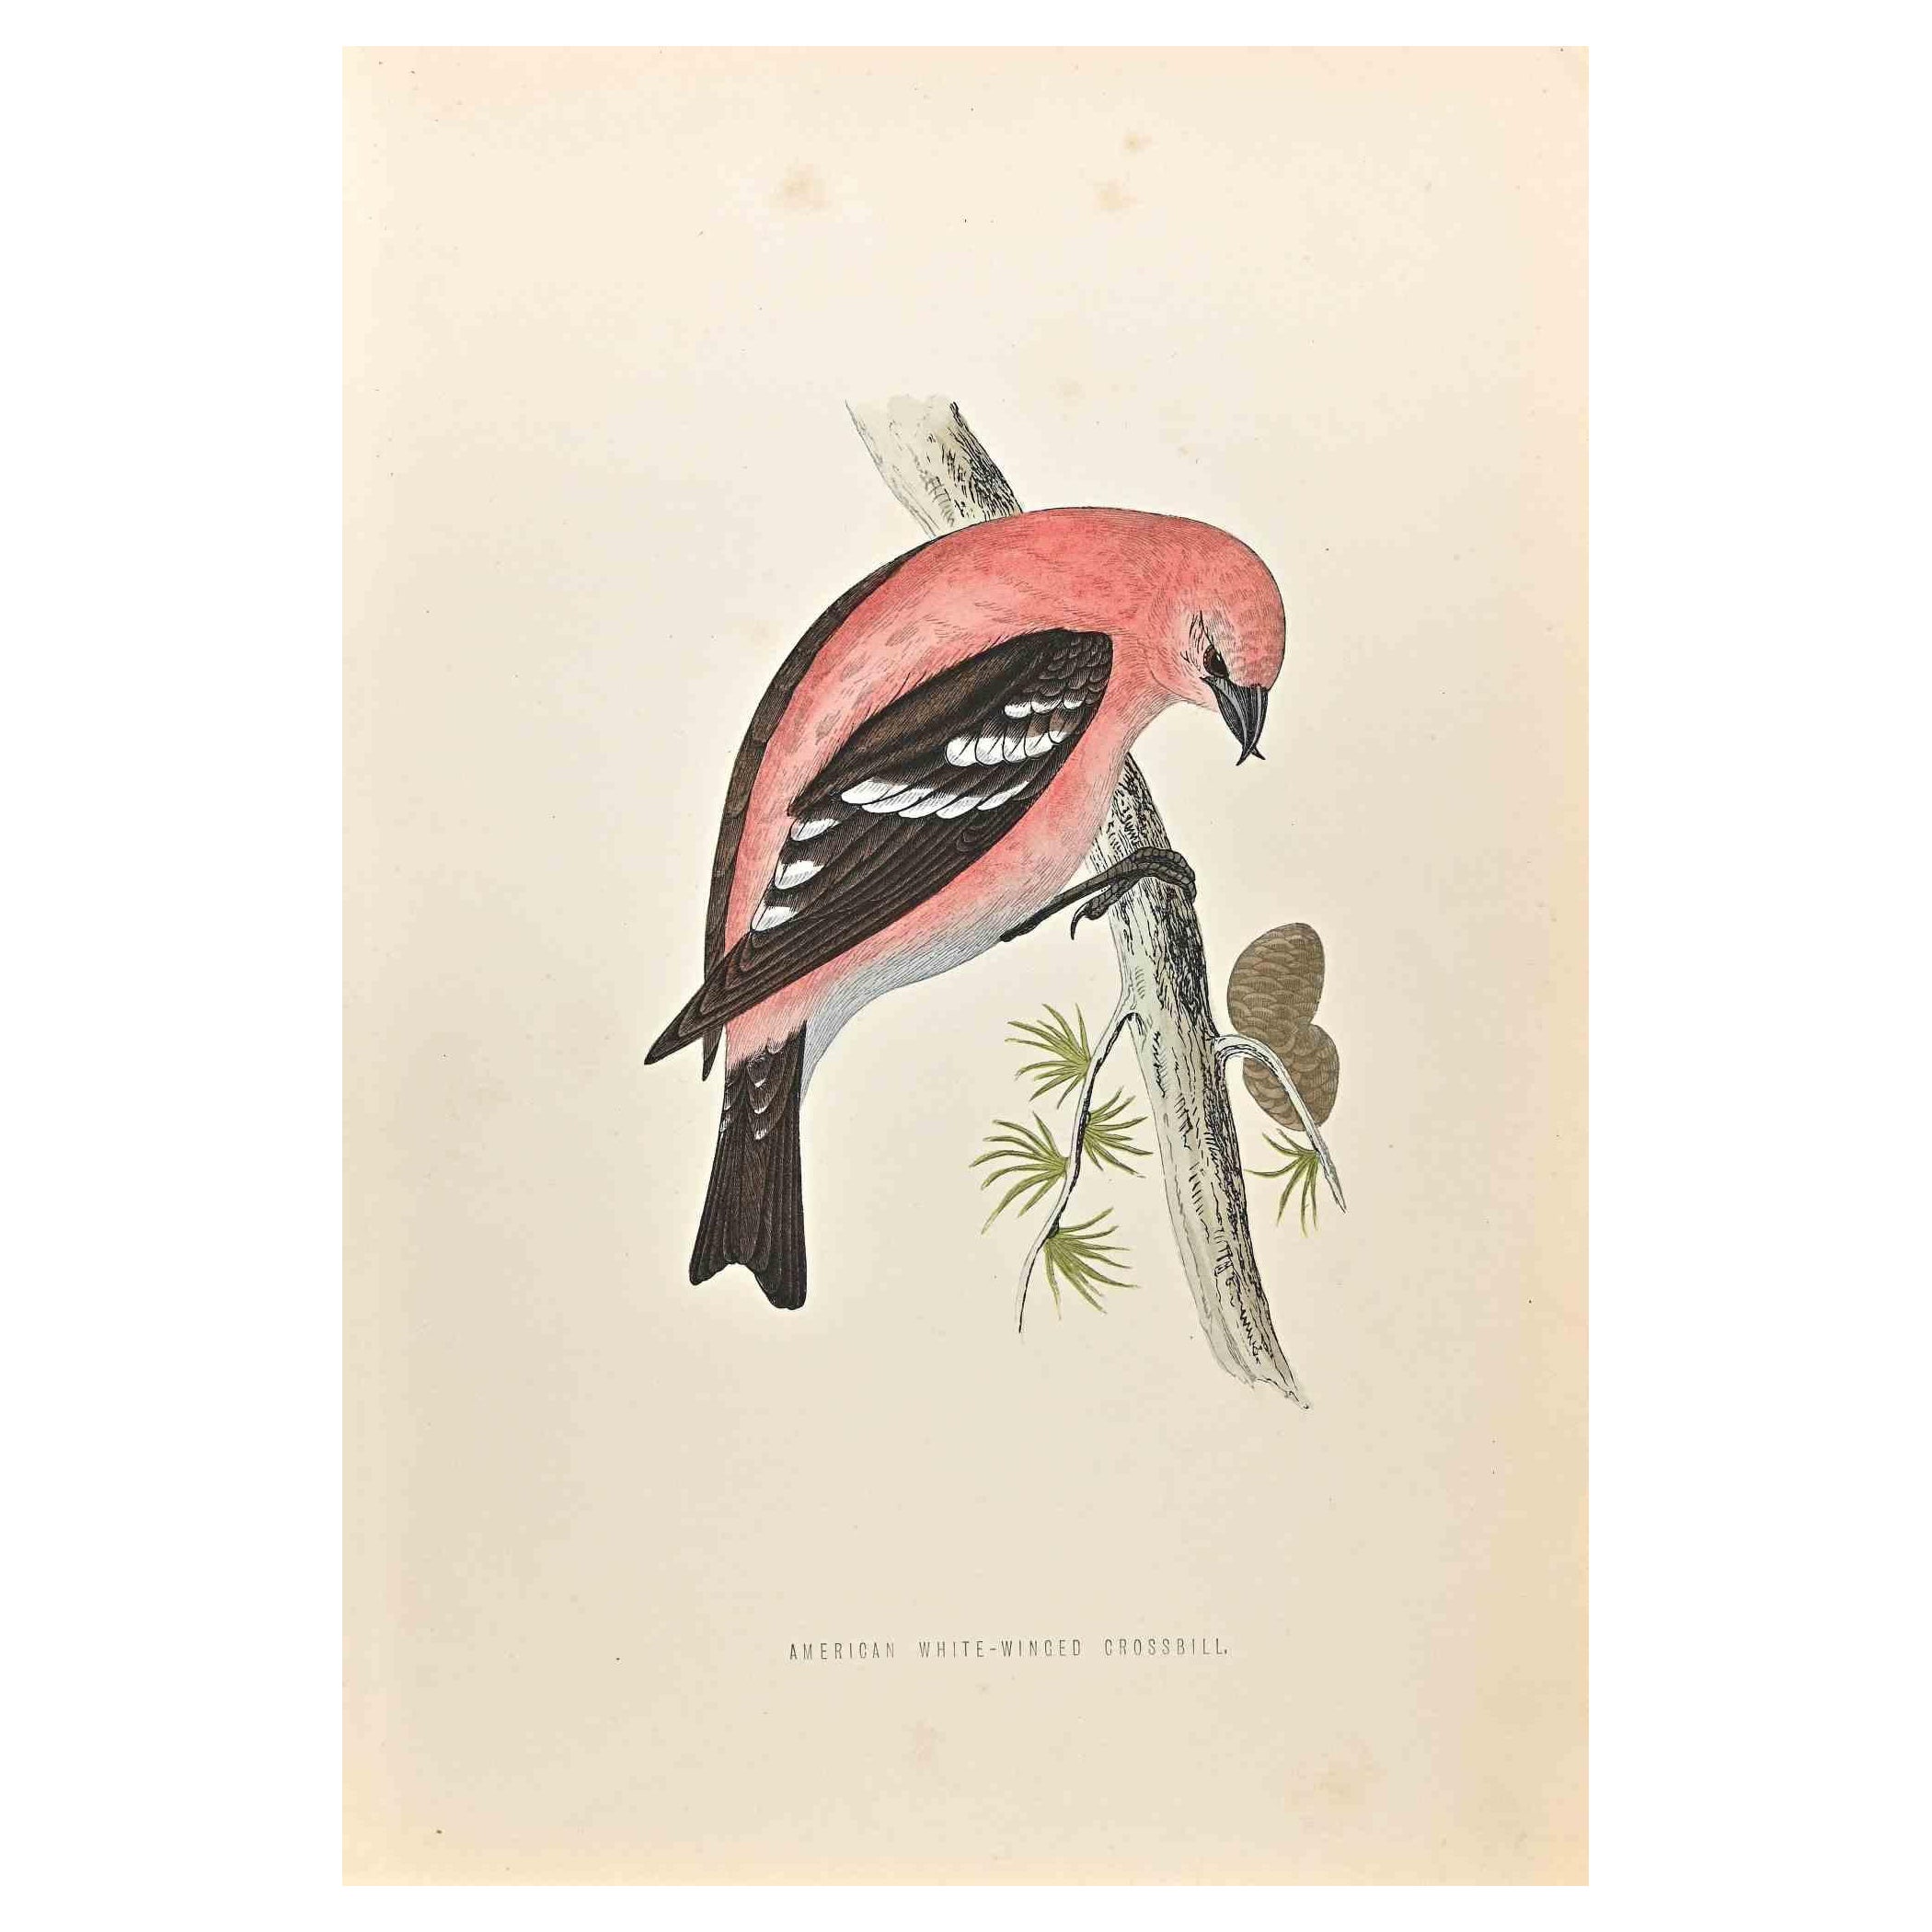 American White-Winged Crossbill is a modern artwork realized in 1870 by the British artist Alexander Francis Lydon (1836-1917) . 

Woodcut print, hand colored, published by London, Bell & Sons, 1870.  Name of the bird printed in plate. This work is